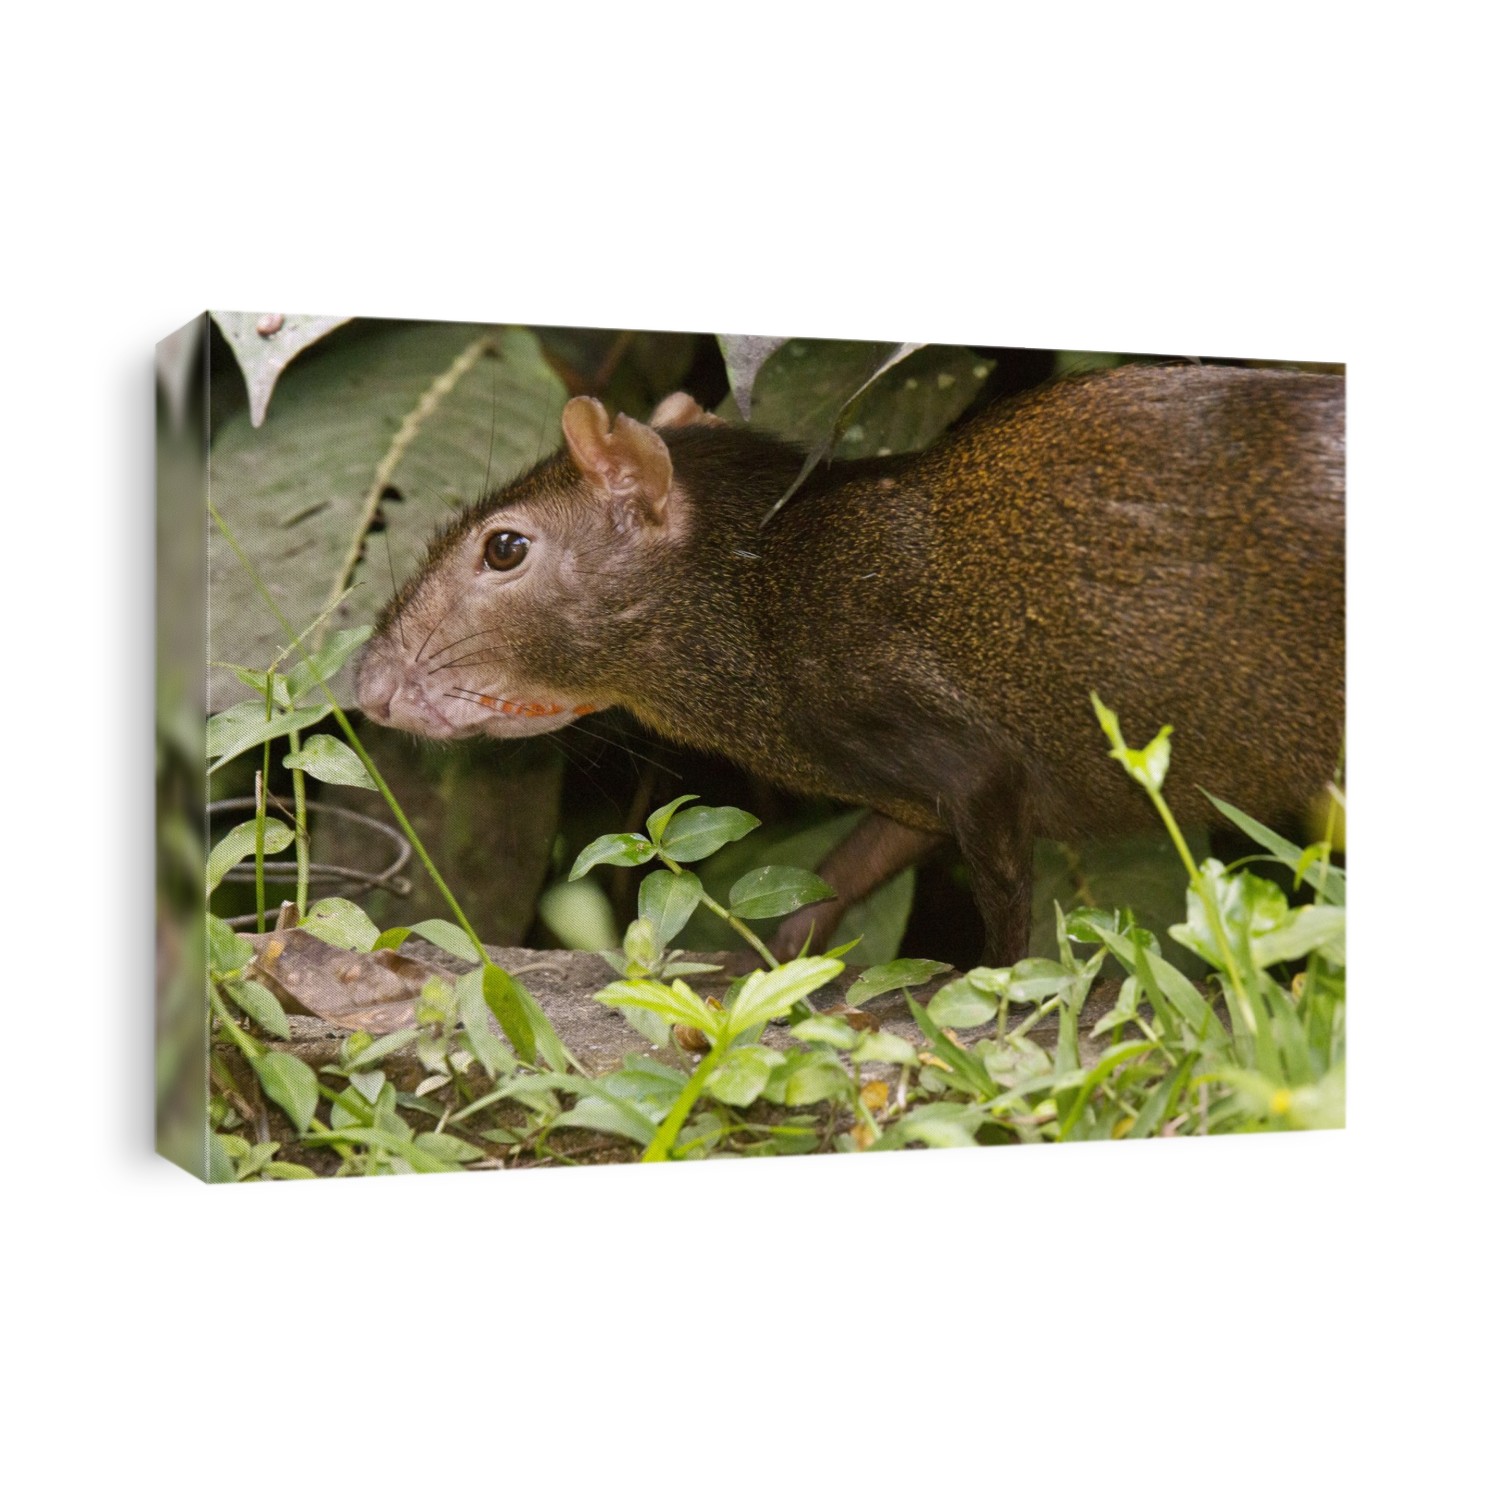 Red-rumped agouti (Dasyprocta leporina) foraging for food. This large rodent inhabits the forests and savannahs of northern South America, where it feeds on a variety of foods, including fruit, seeds, grass and roots. It spends much of its life underground in a complex series of chambers and tunnels, which typically lead directly to sources of food. The agouti can reach over 60 centimetres in length, and is a favourite prey animal for a variety of carnivores. Photographed in Trinidad.